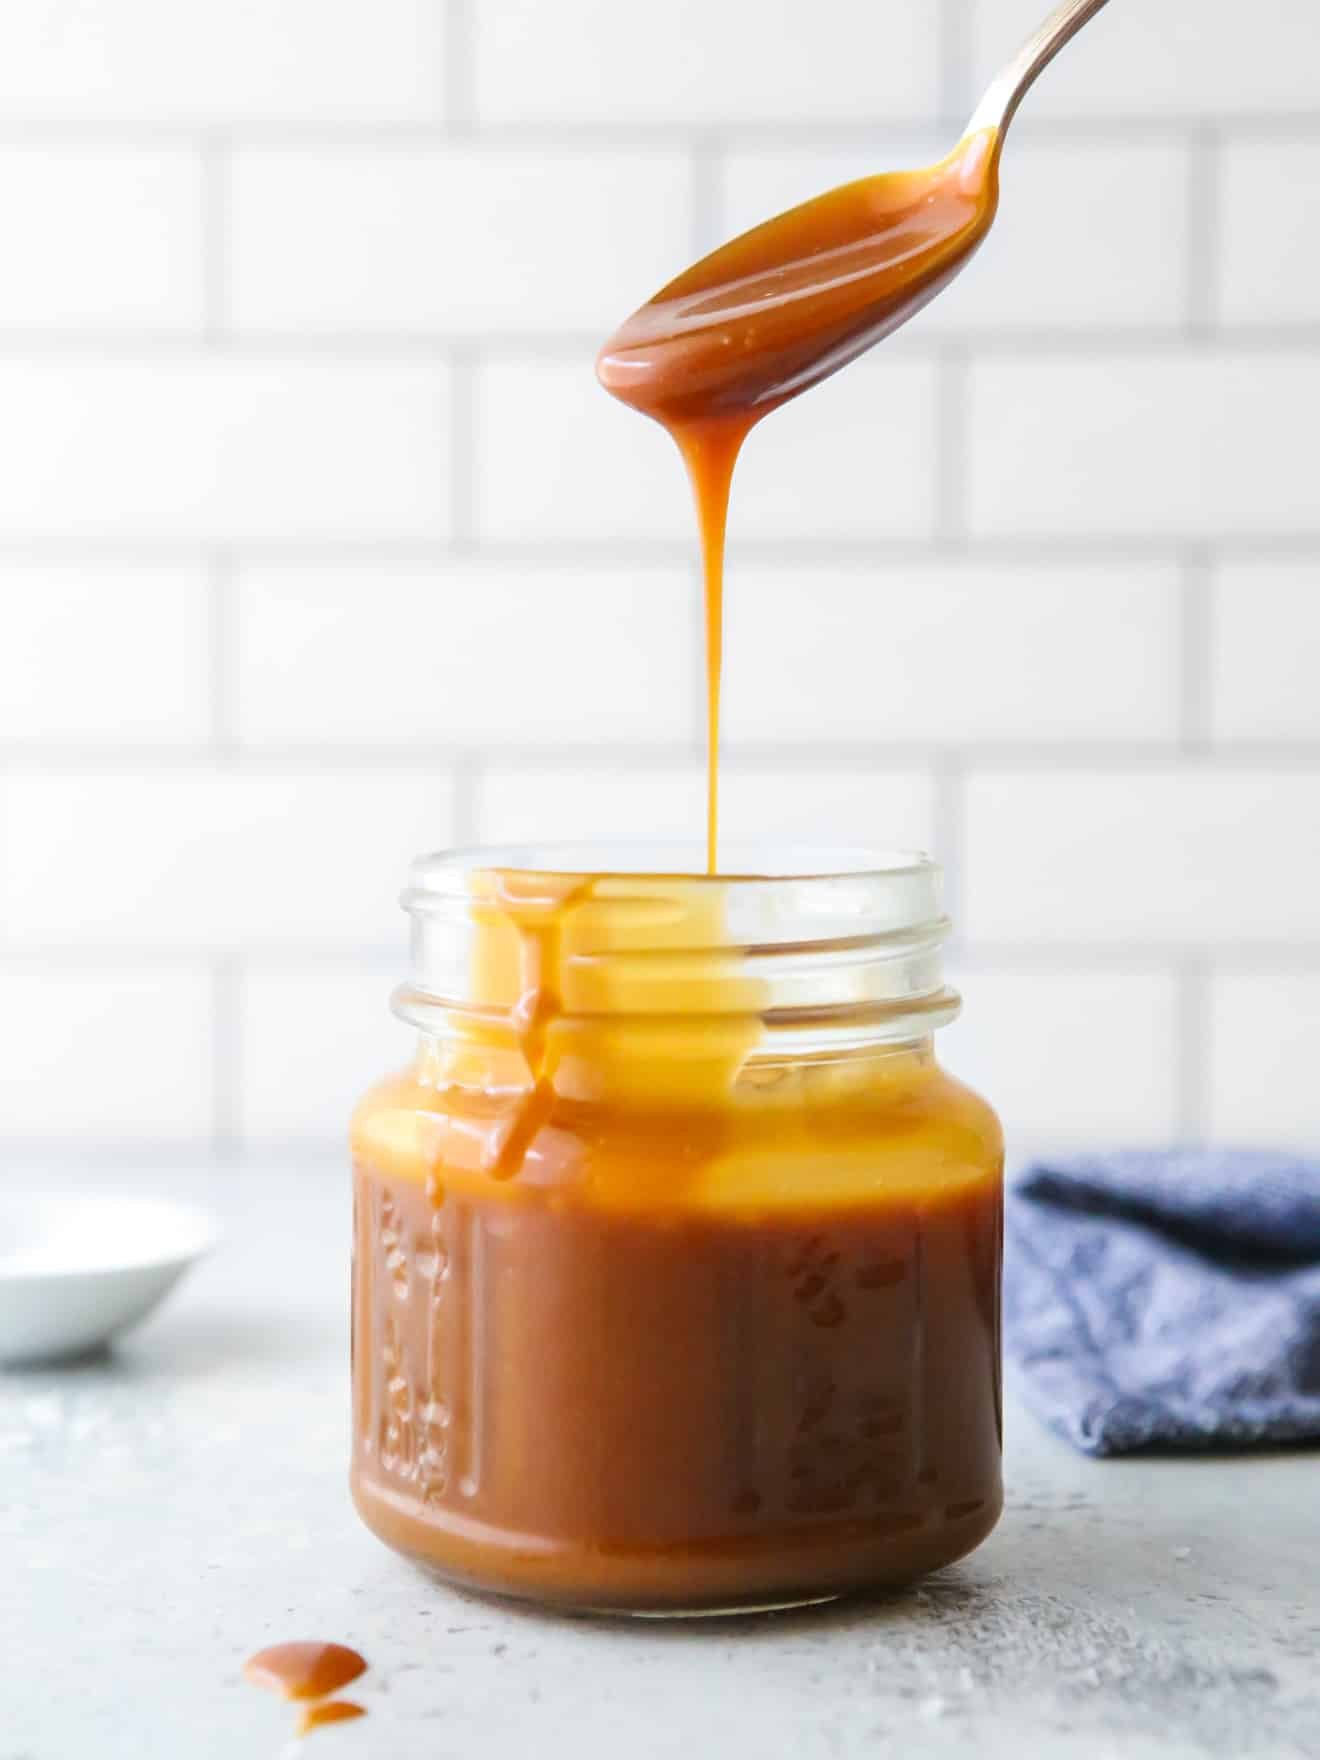 How to Make Homemade Caramel - Completely Delicious